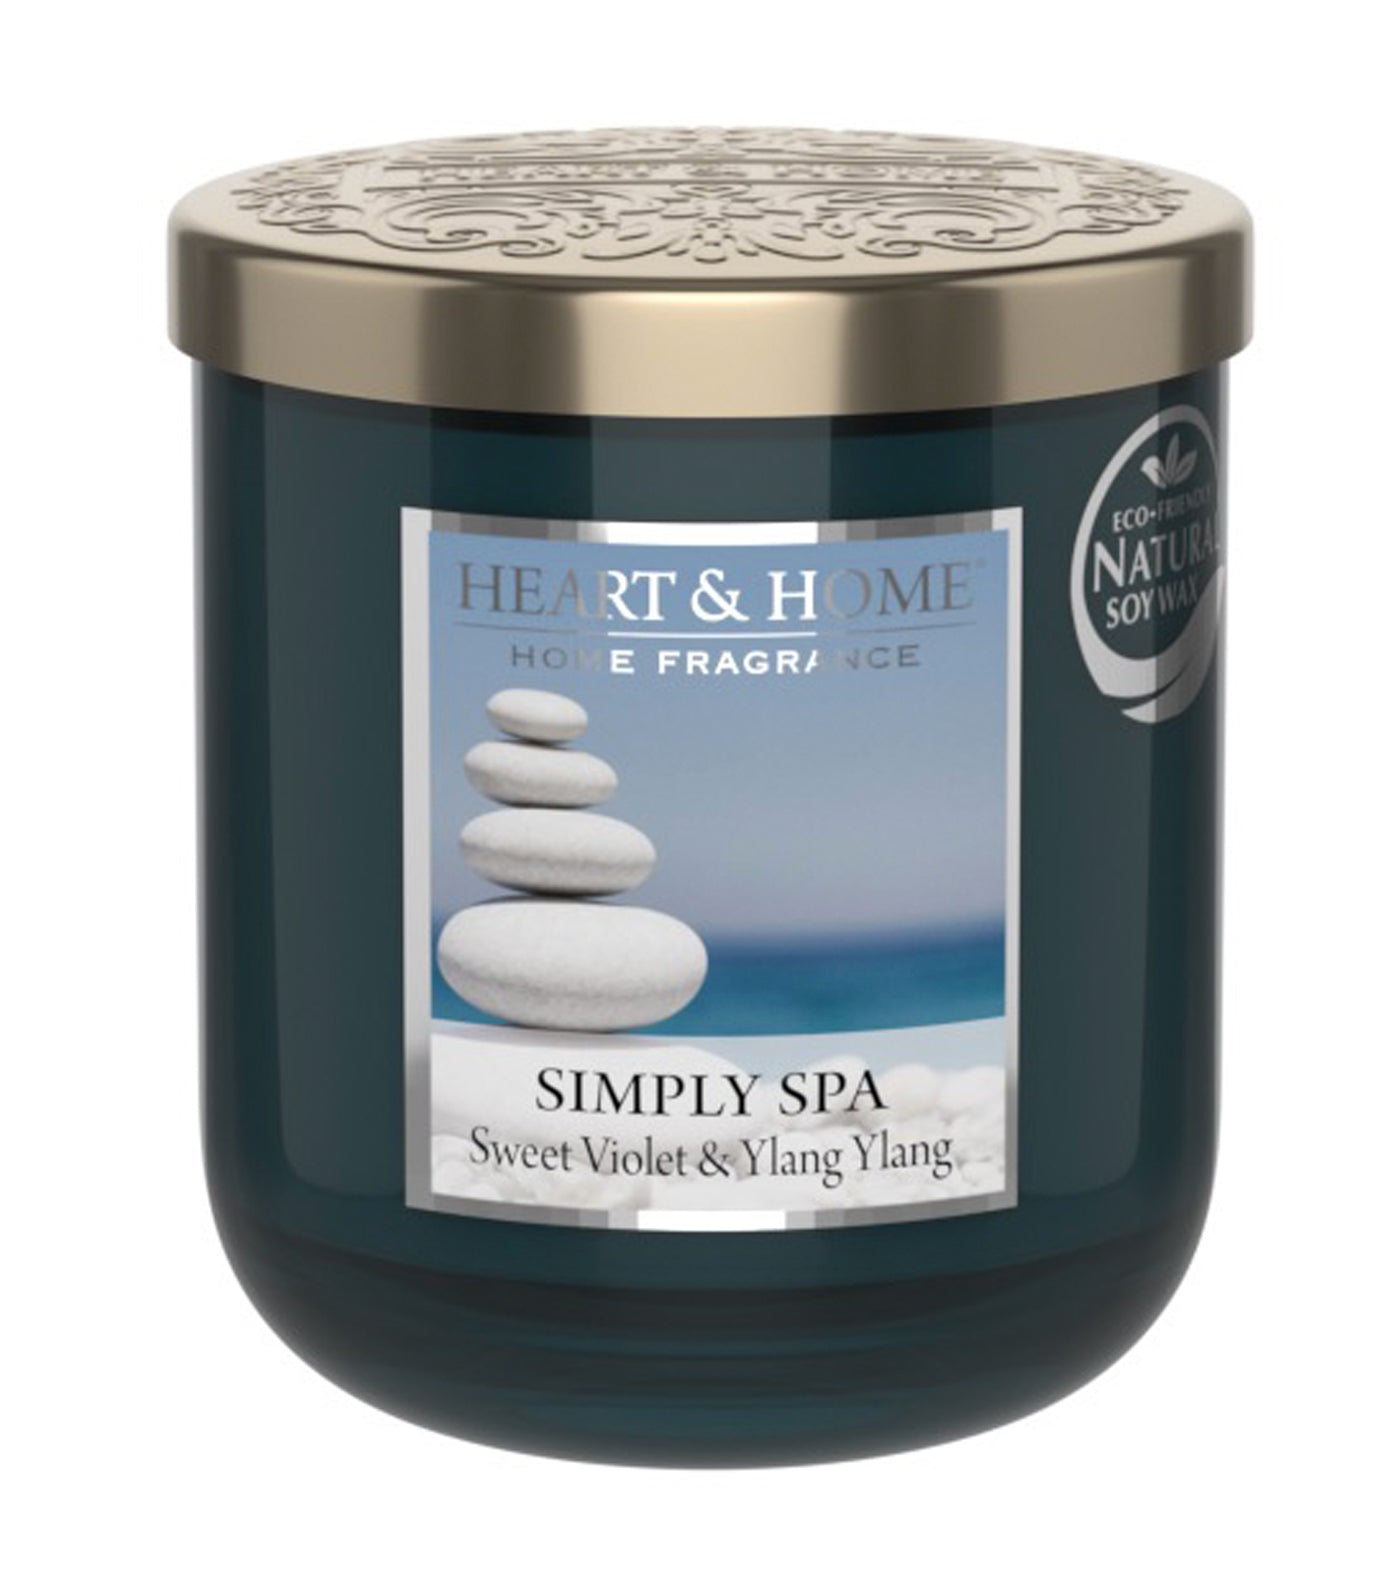 heart & home simply spa - small soy wax candle